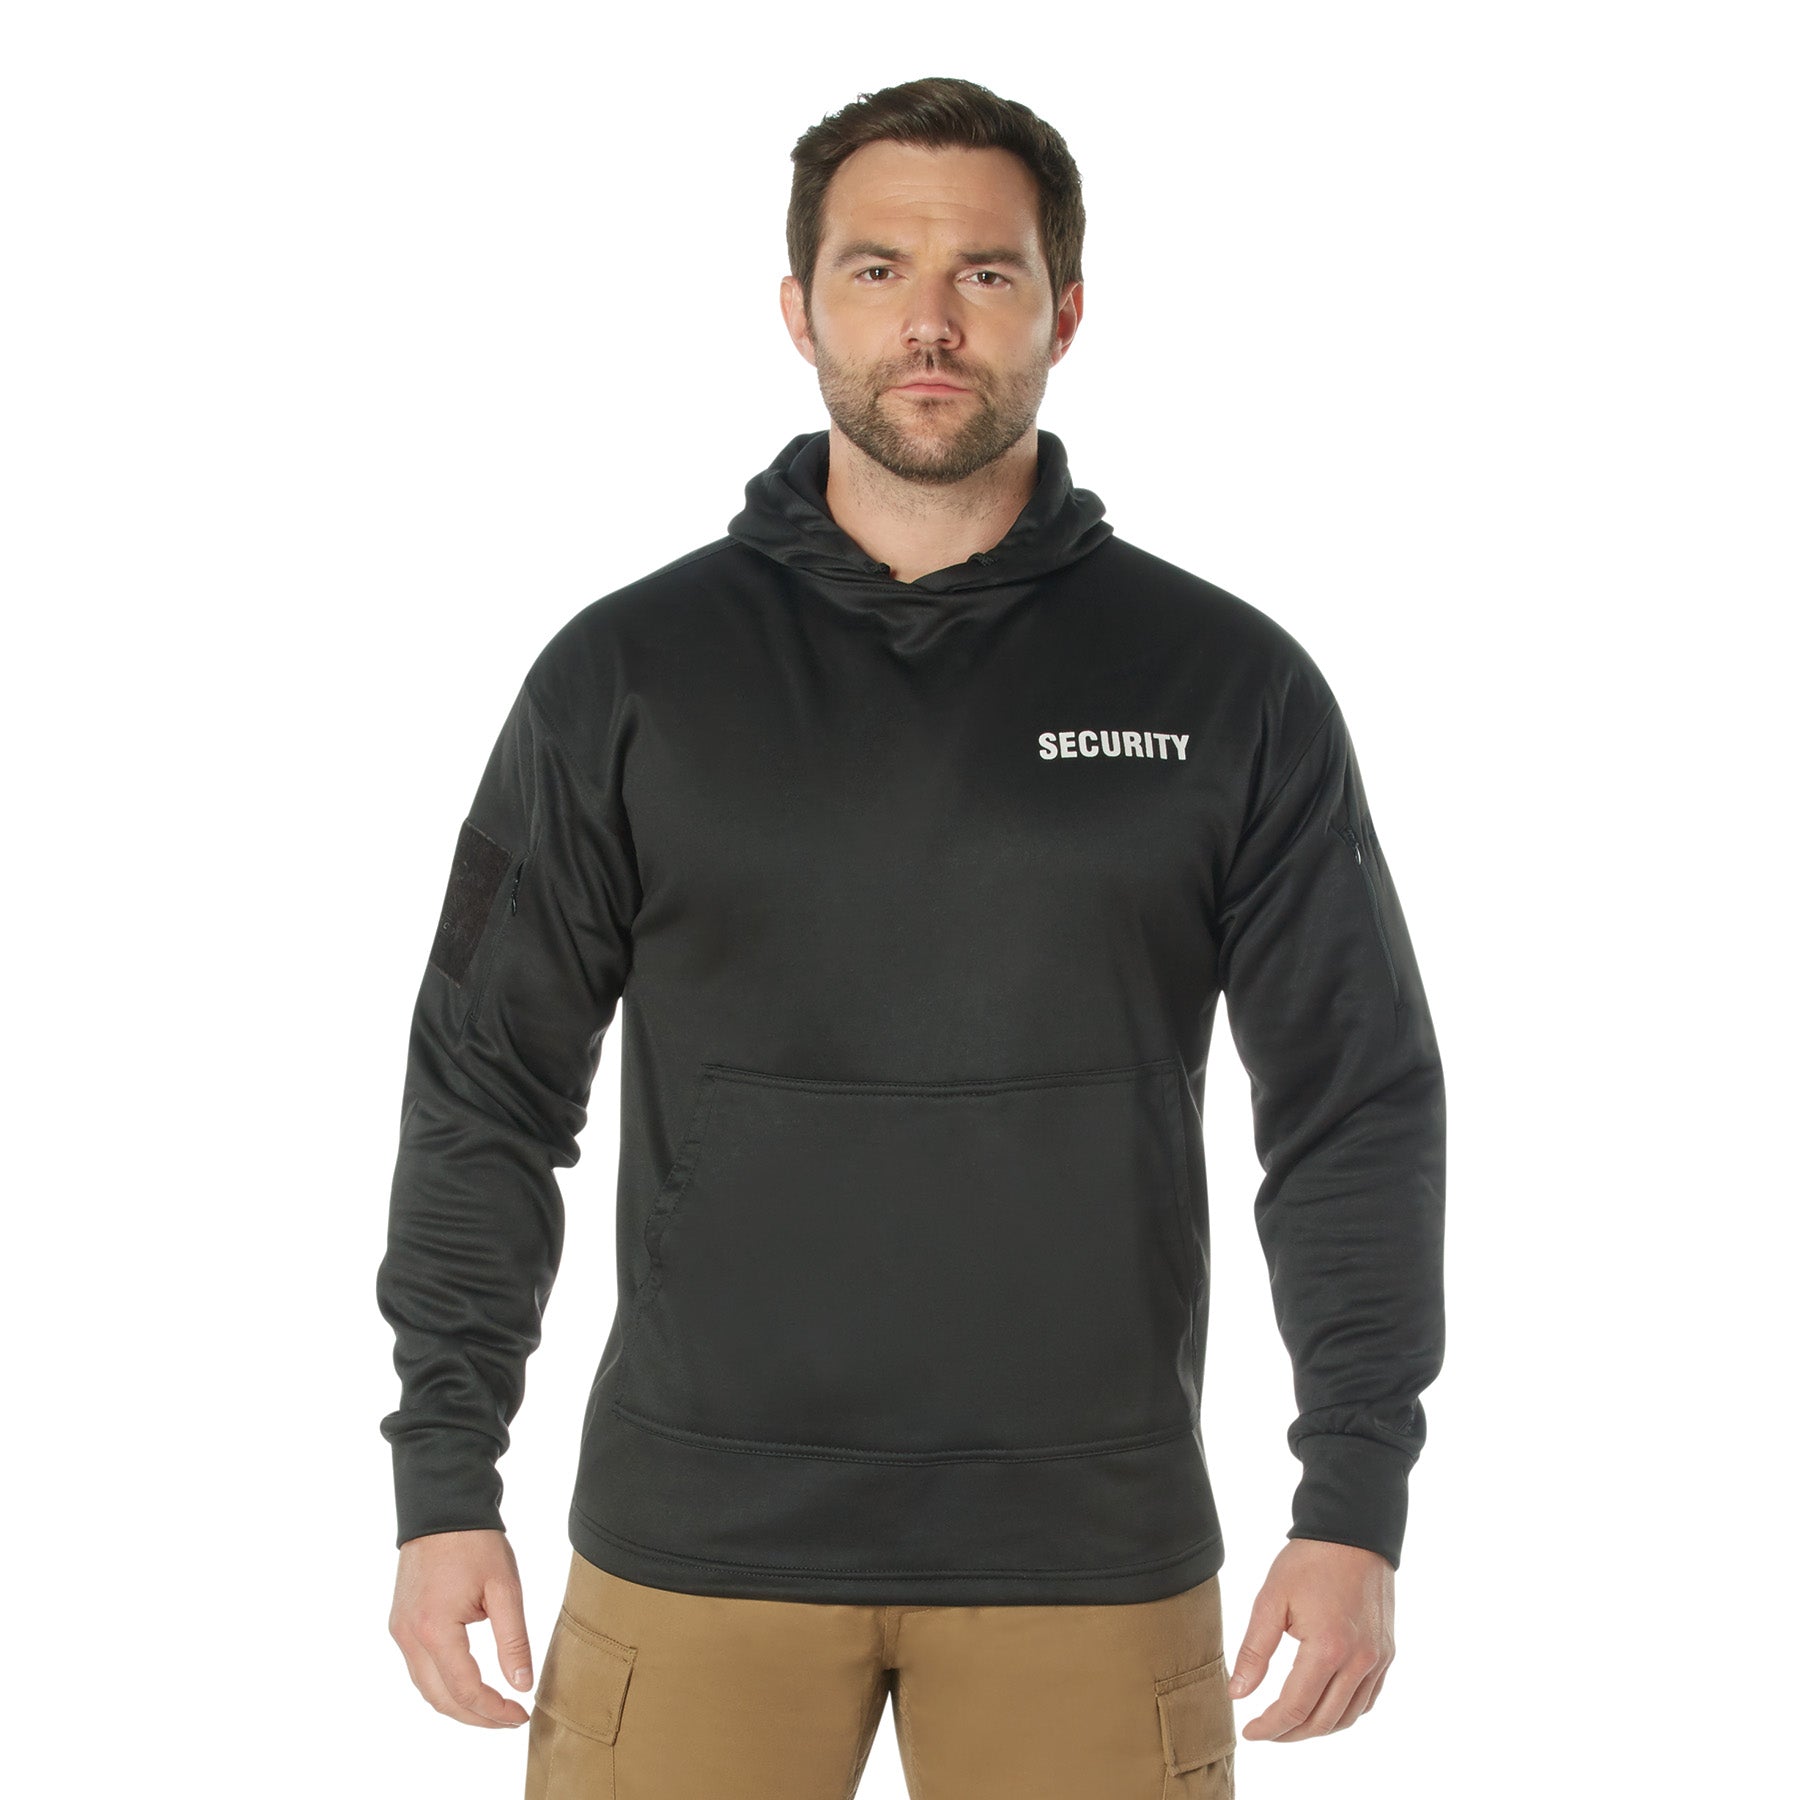 [Public Safety] Poly Security Concealed Carry Hooded Sweatshirts Security Black